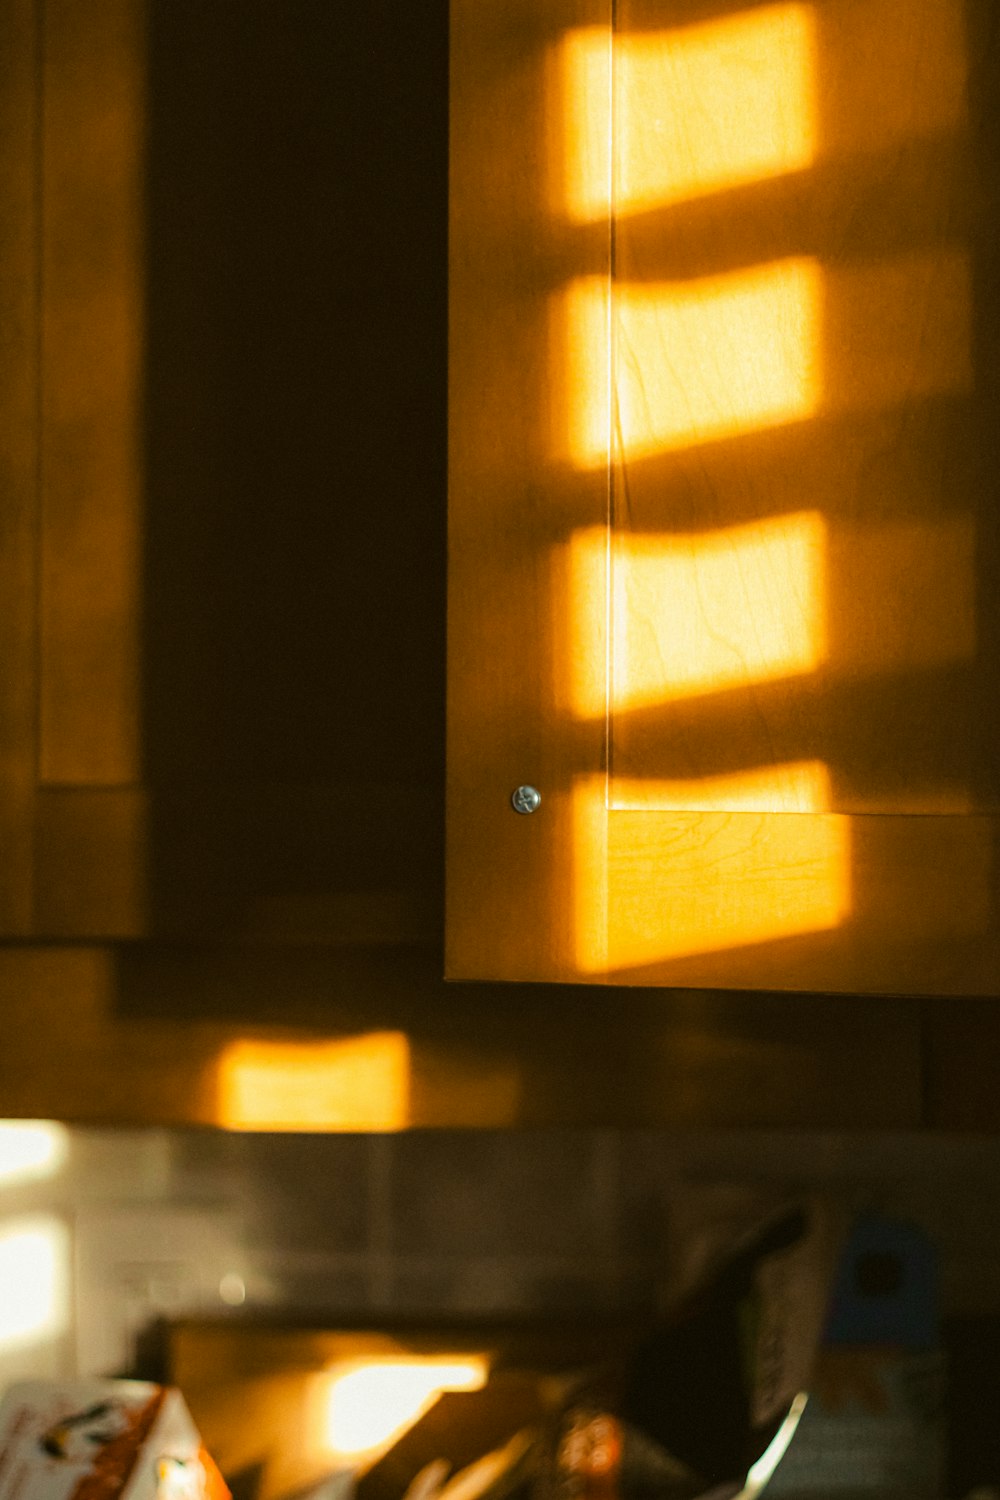 a kitchen scene with focus on the oven